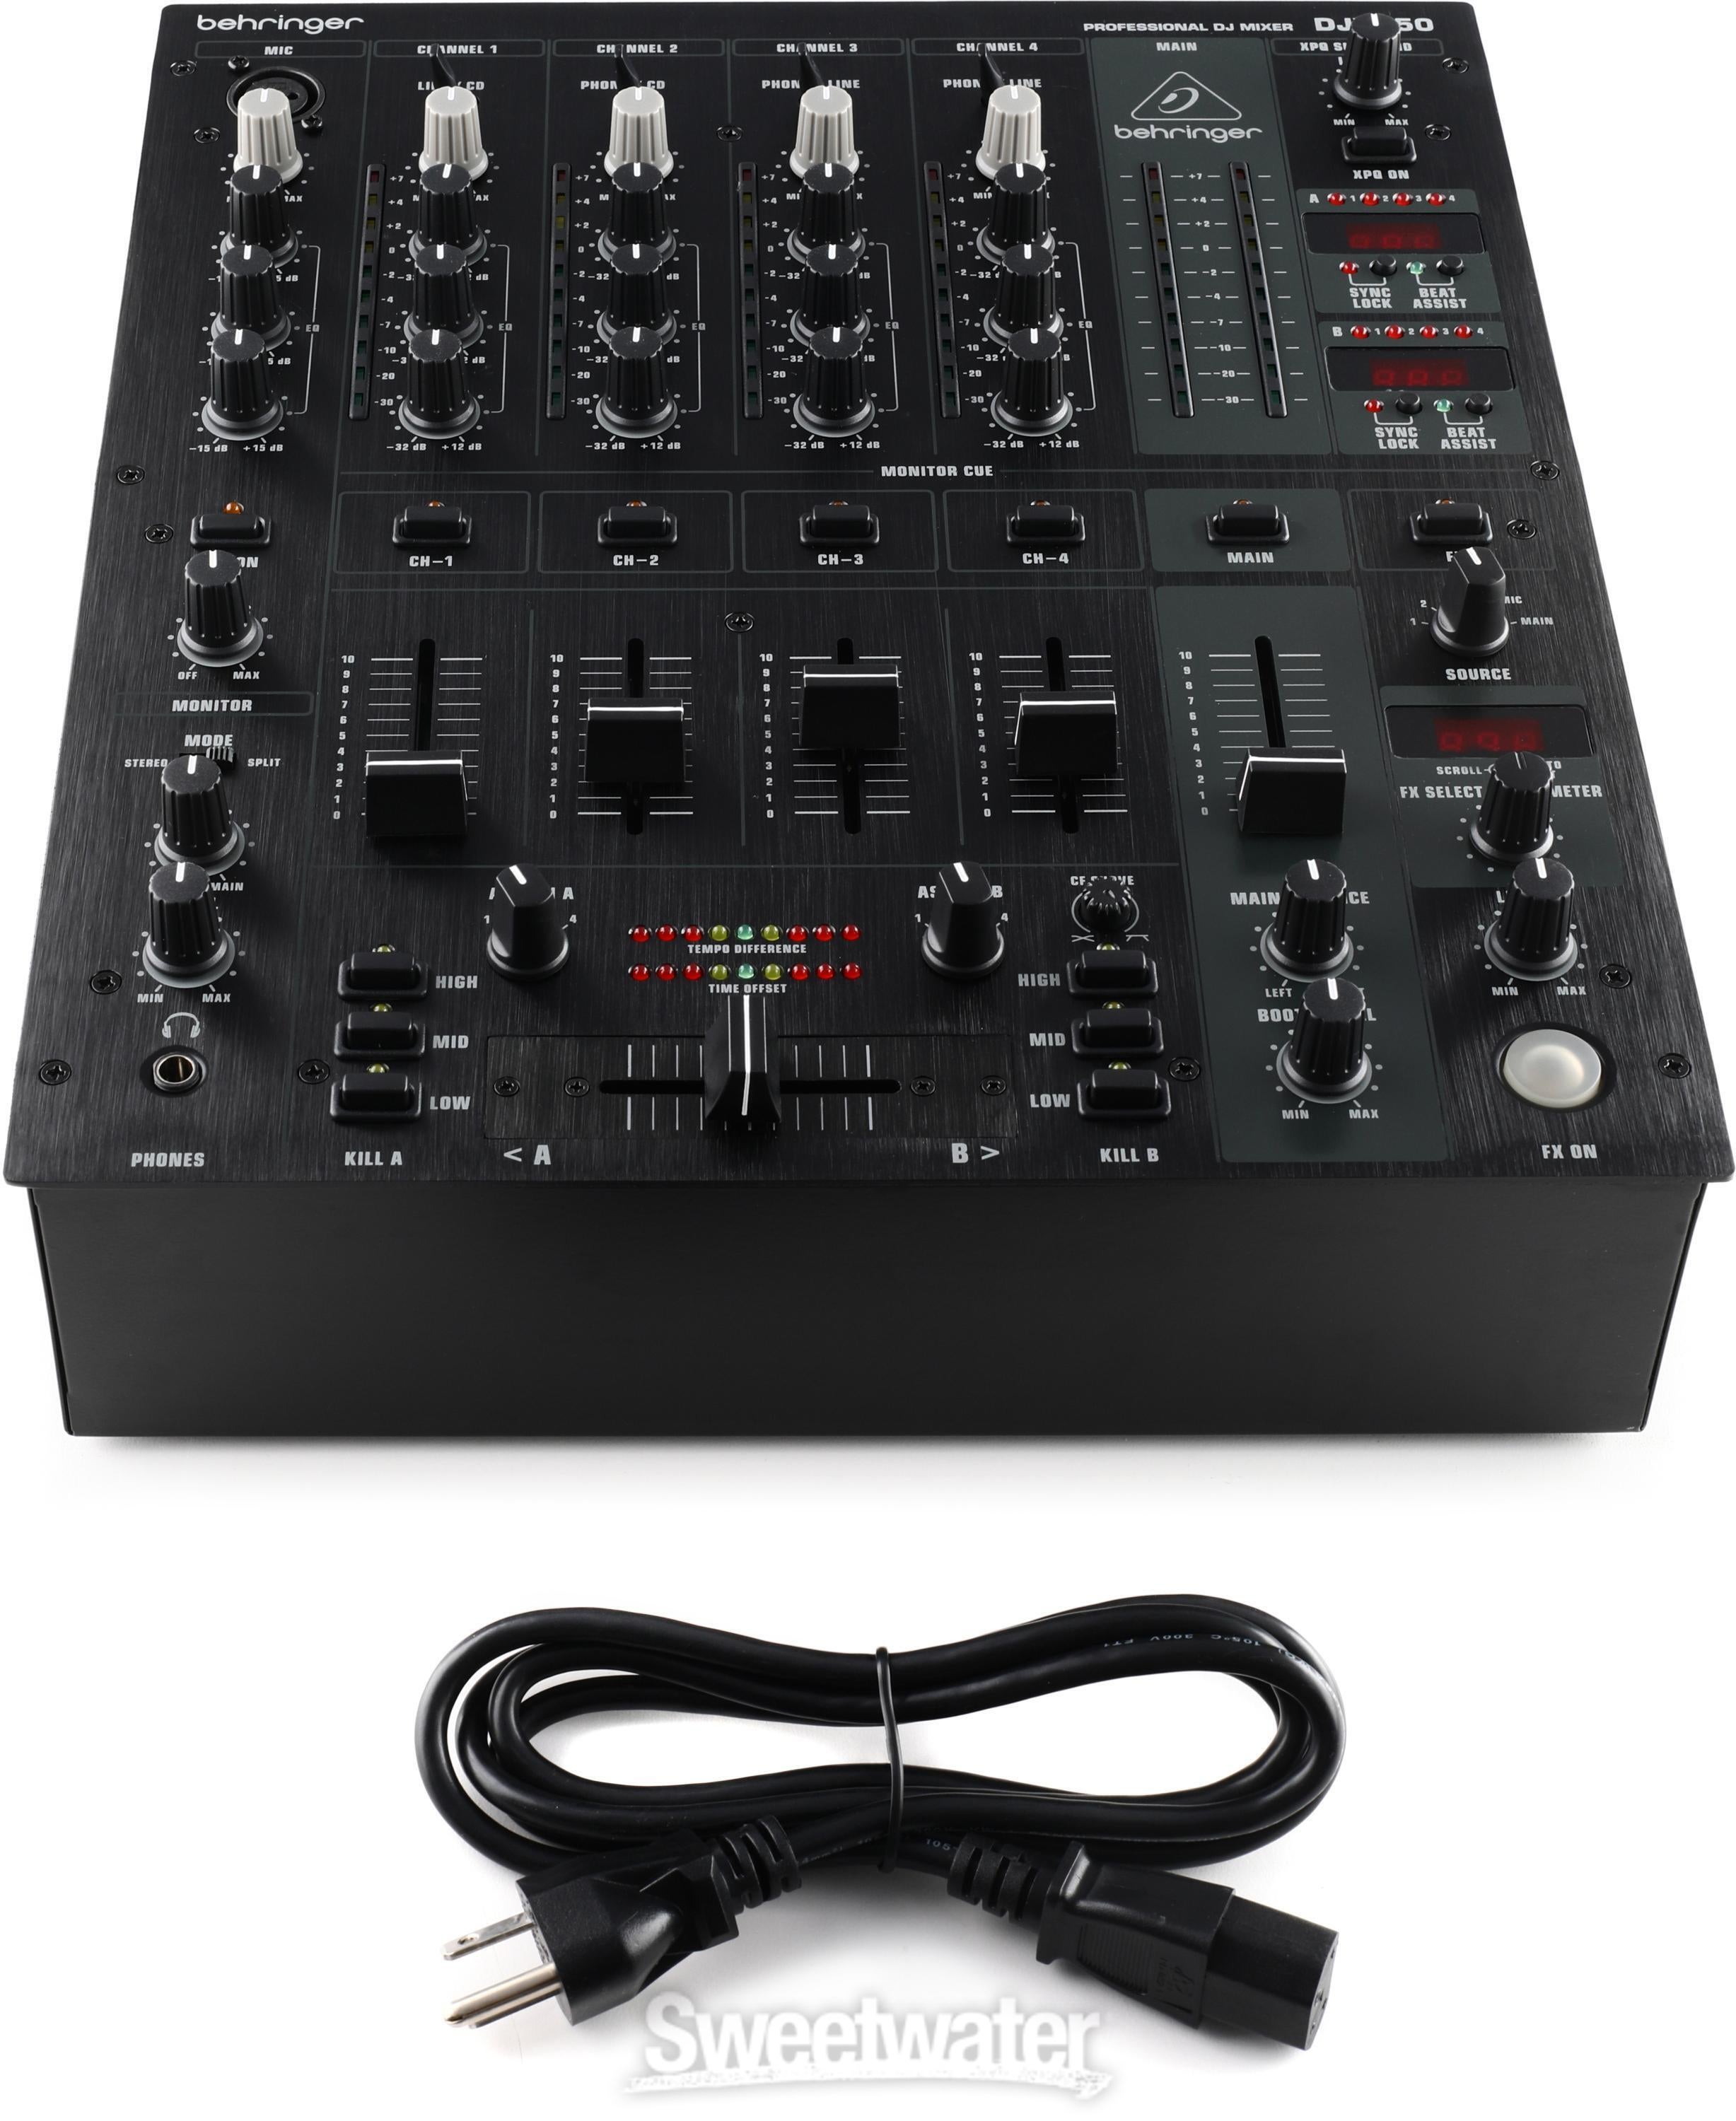 Behringer Pro Mixer DJX750 4-channel DJ Mixer | Sweetwater